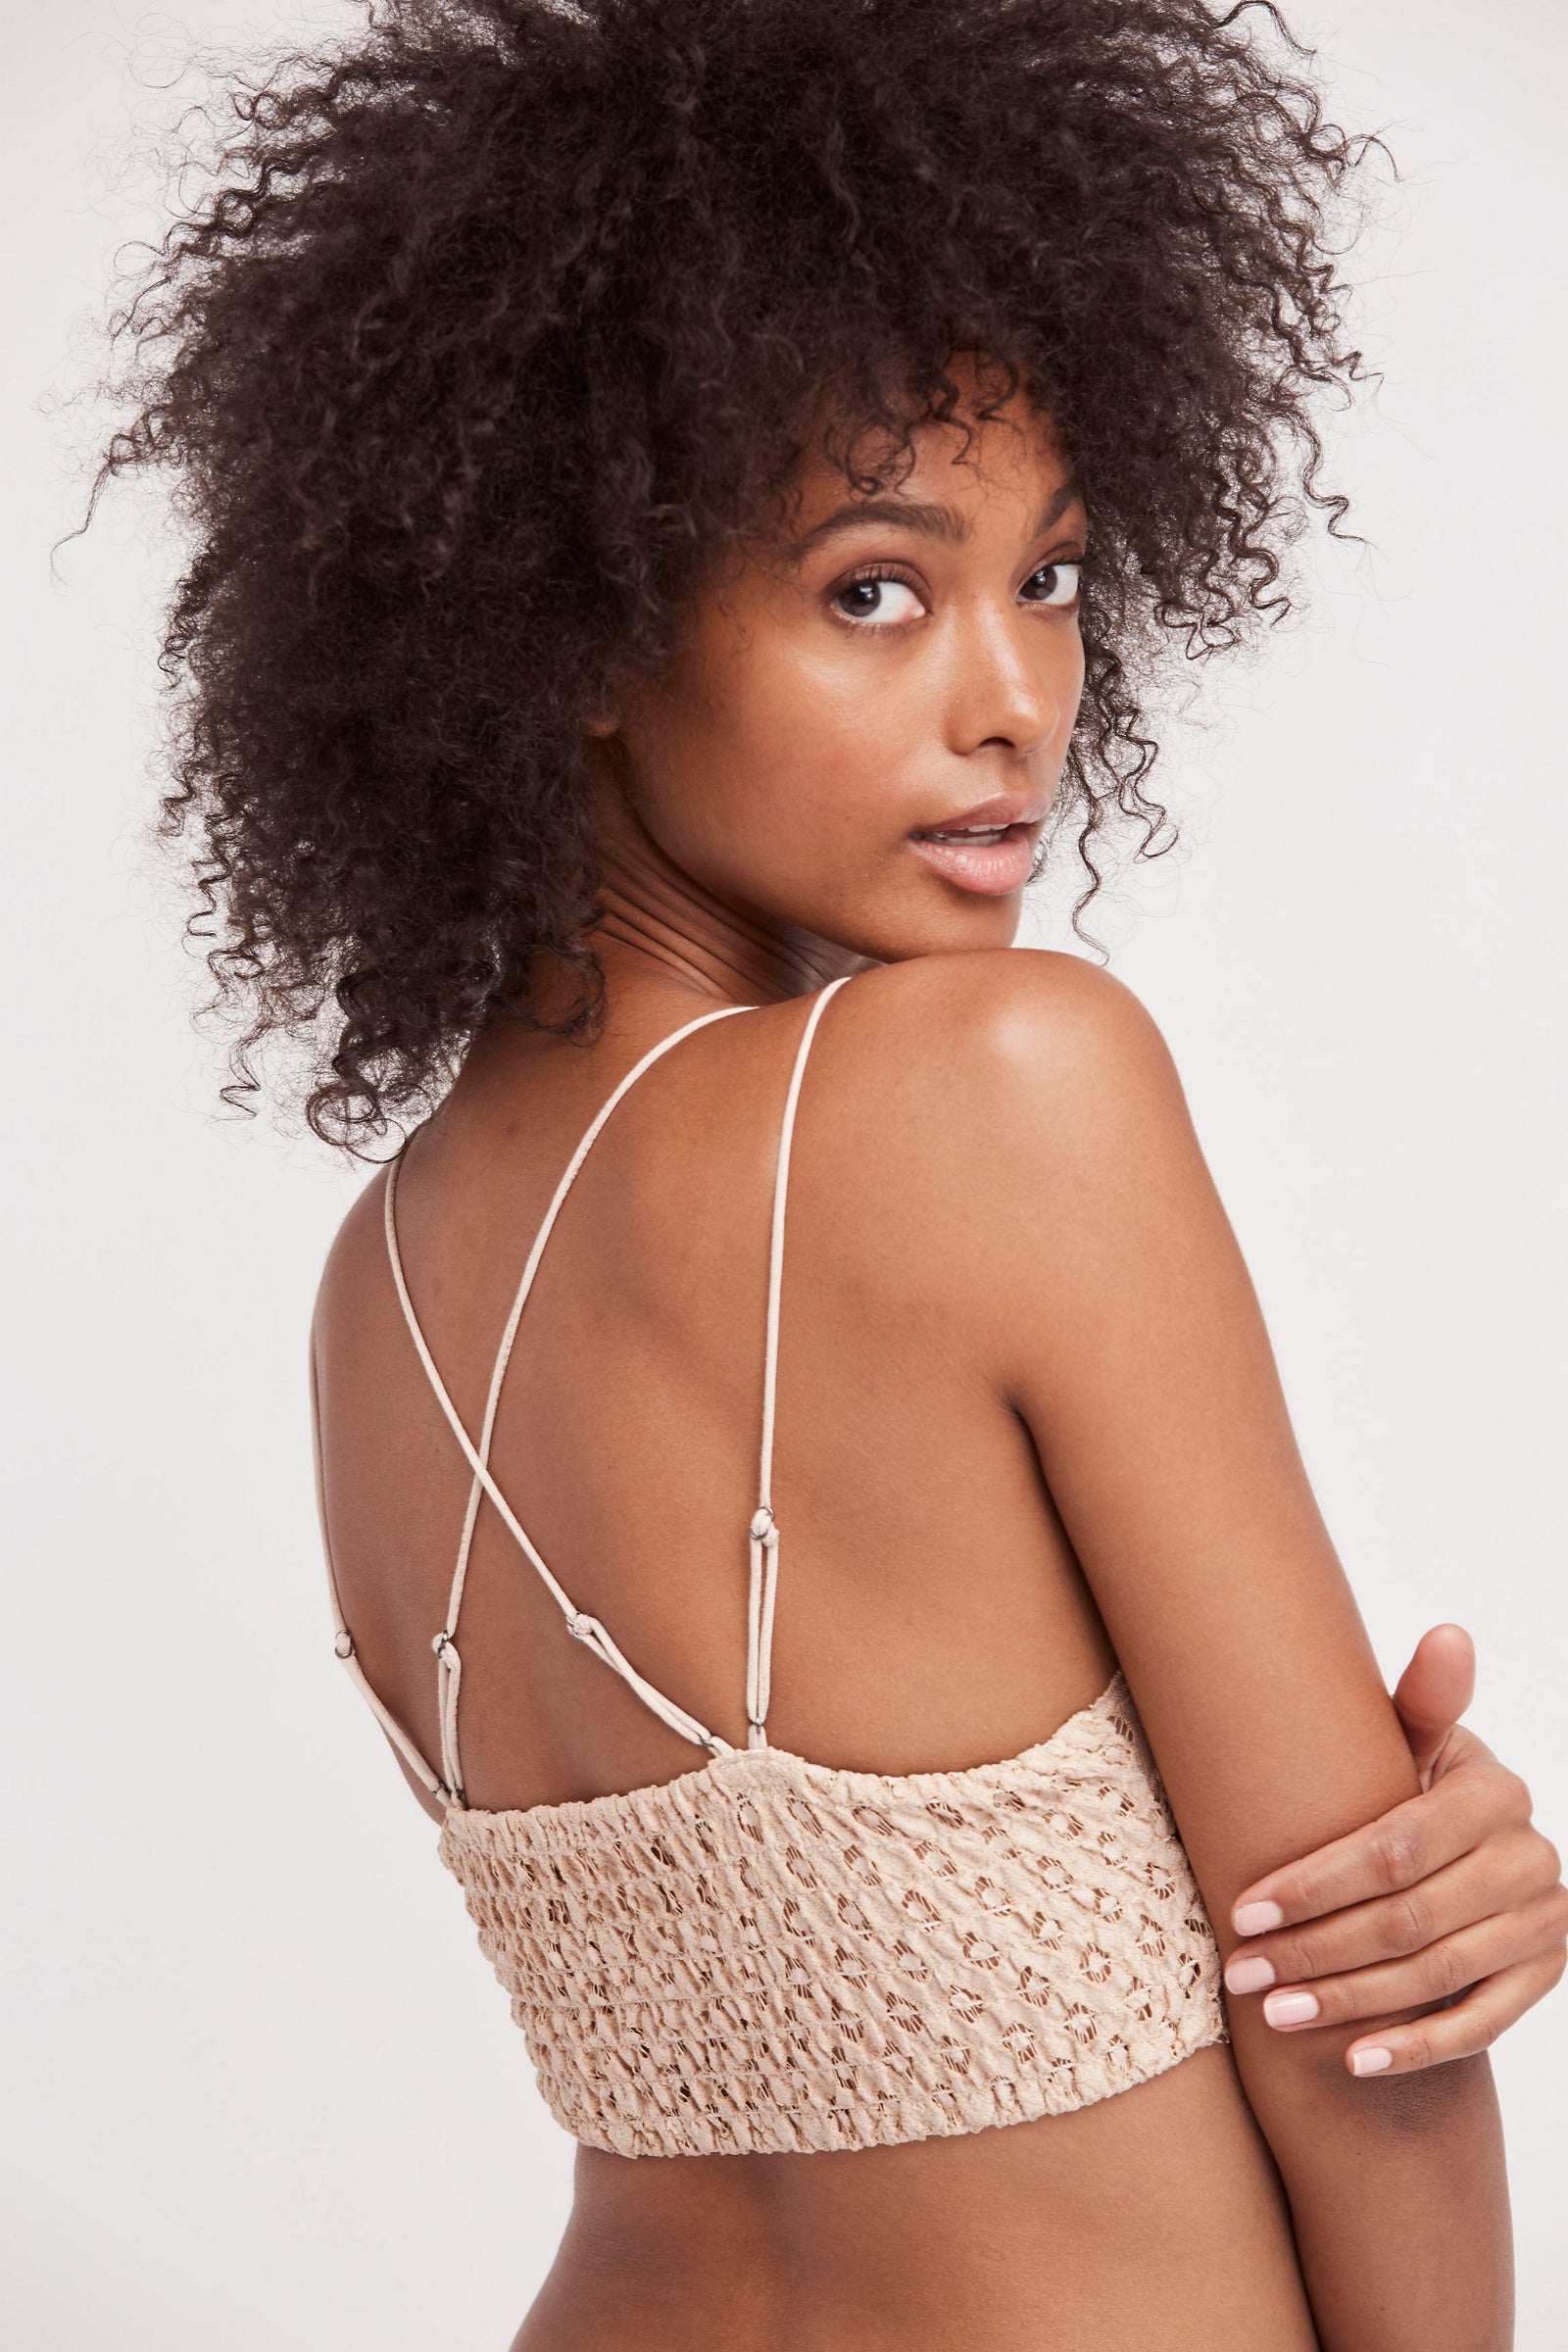 https://cdn.shopify.com/s/files/1/2184/4503/products/FW21_FREEPEOPLE_ADELLABRALETTE_NUDE2.jpg?v=1670429541&width=1946